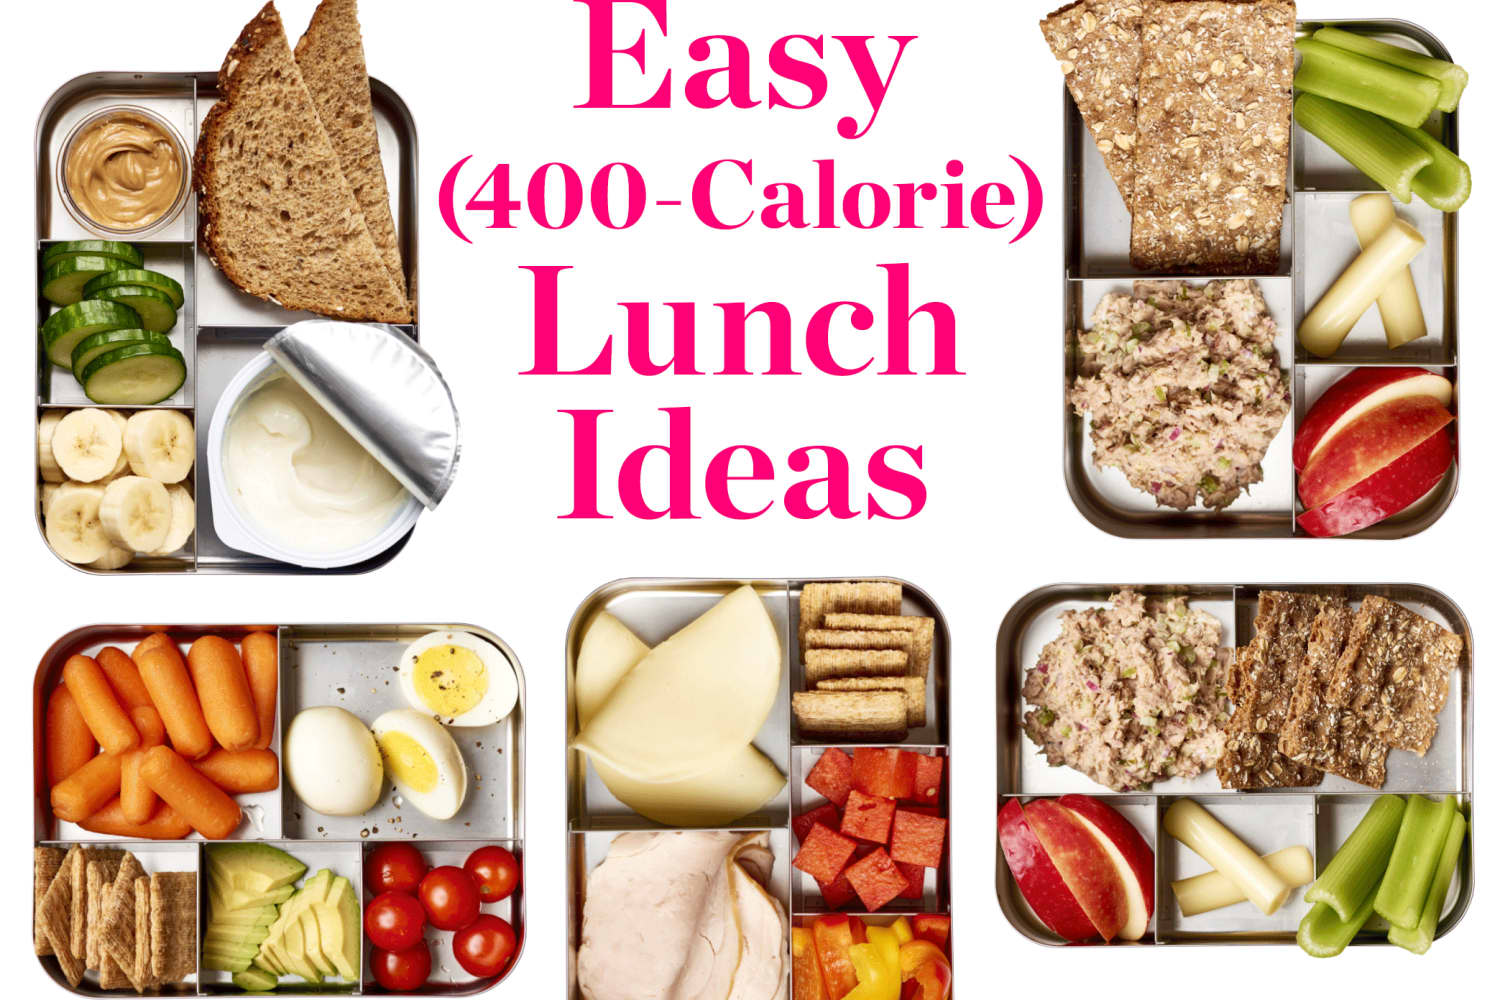 10 Easy Lunch Ideas Under 400 Calories | The Kitchn